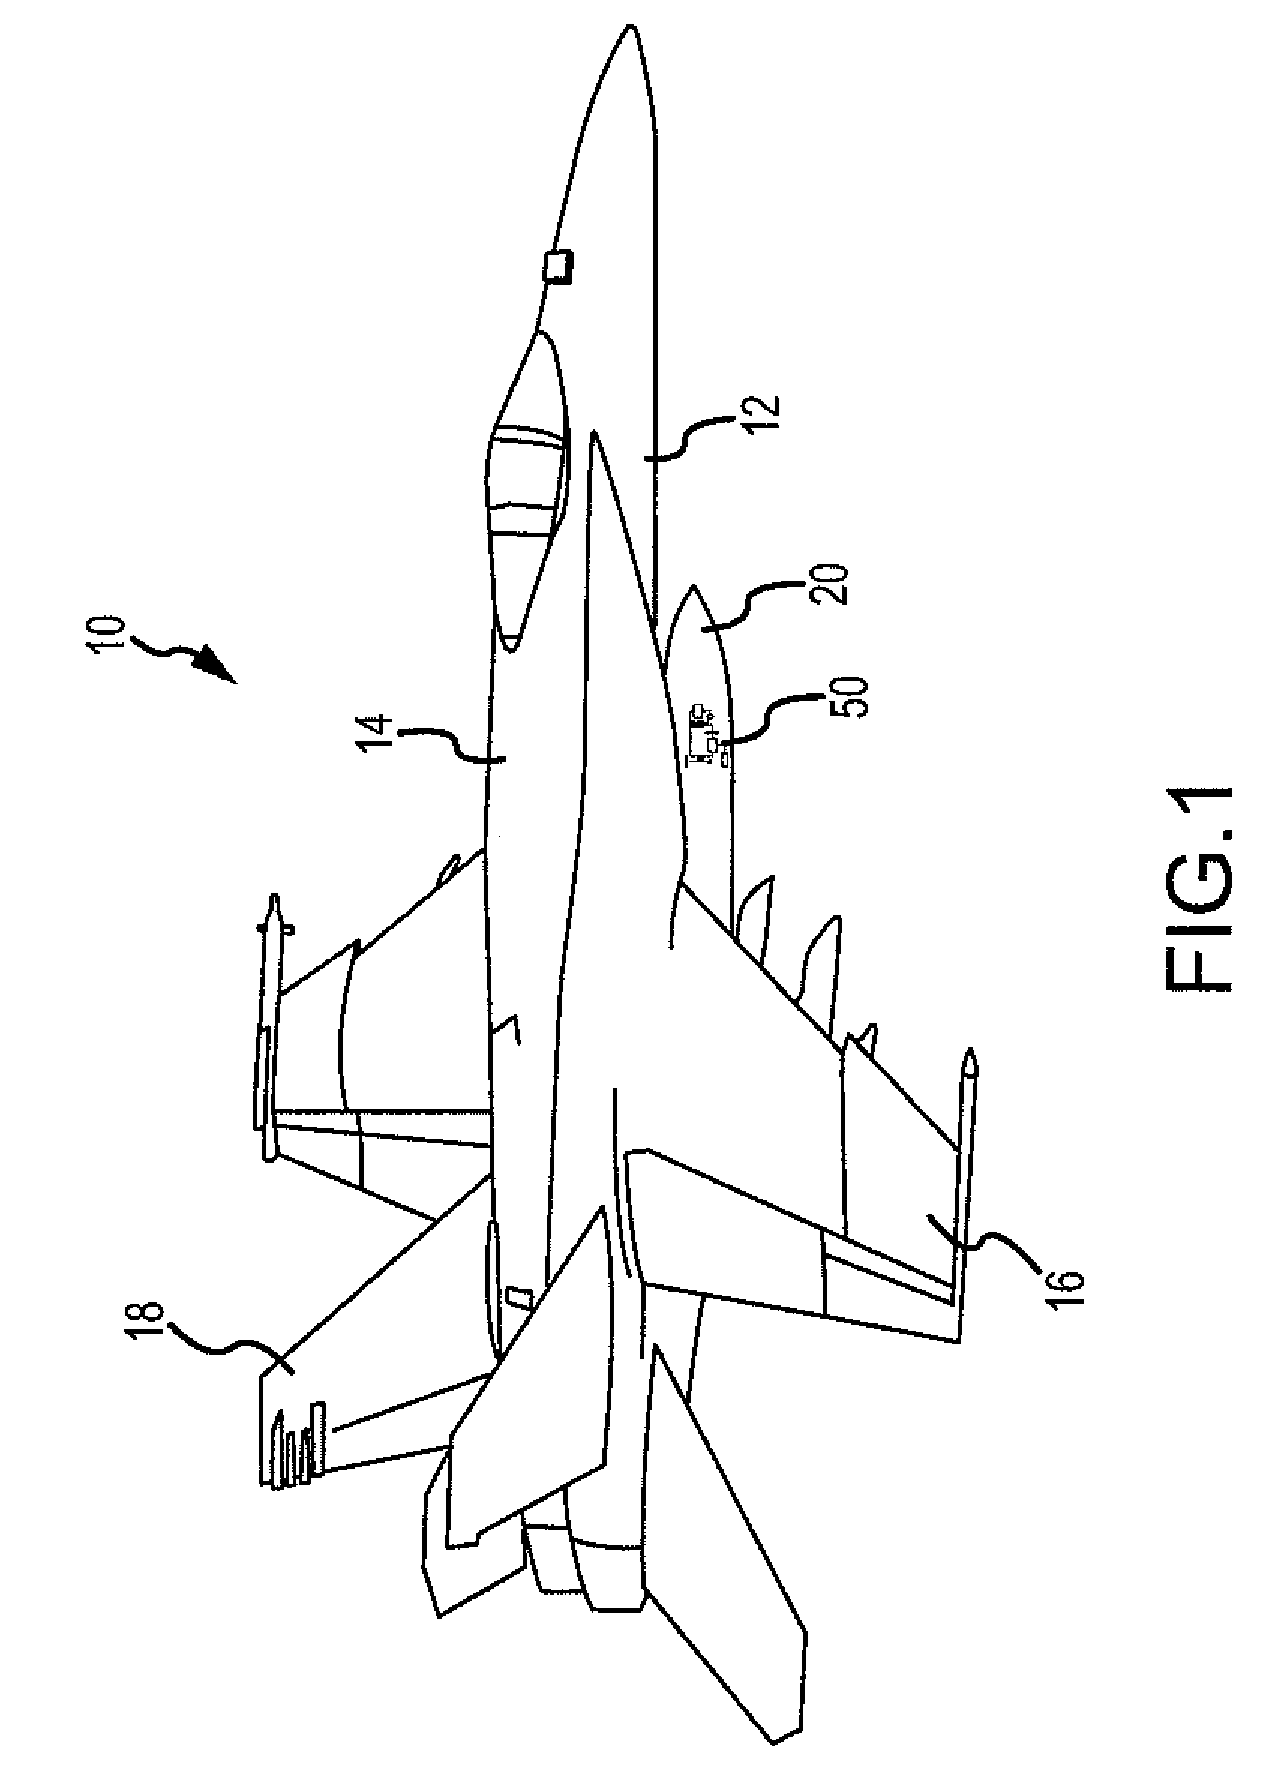 Chemical reaction-based thermal management system and method